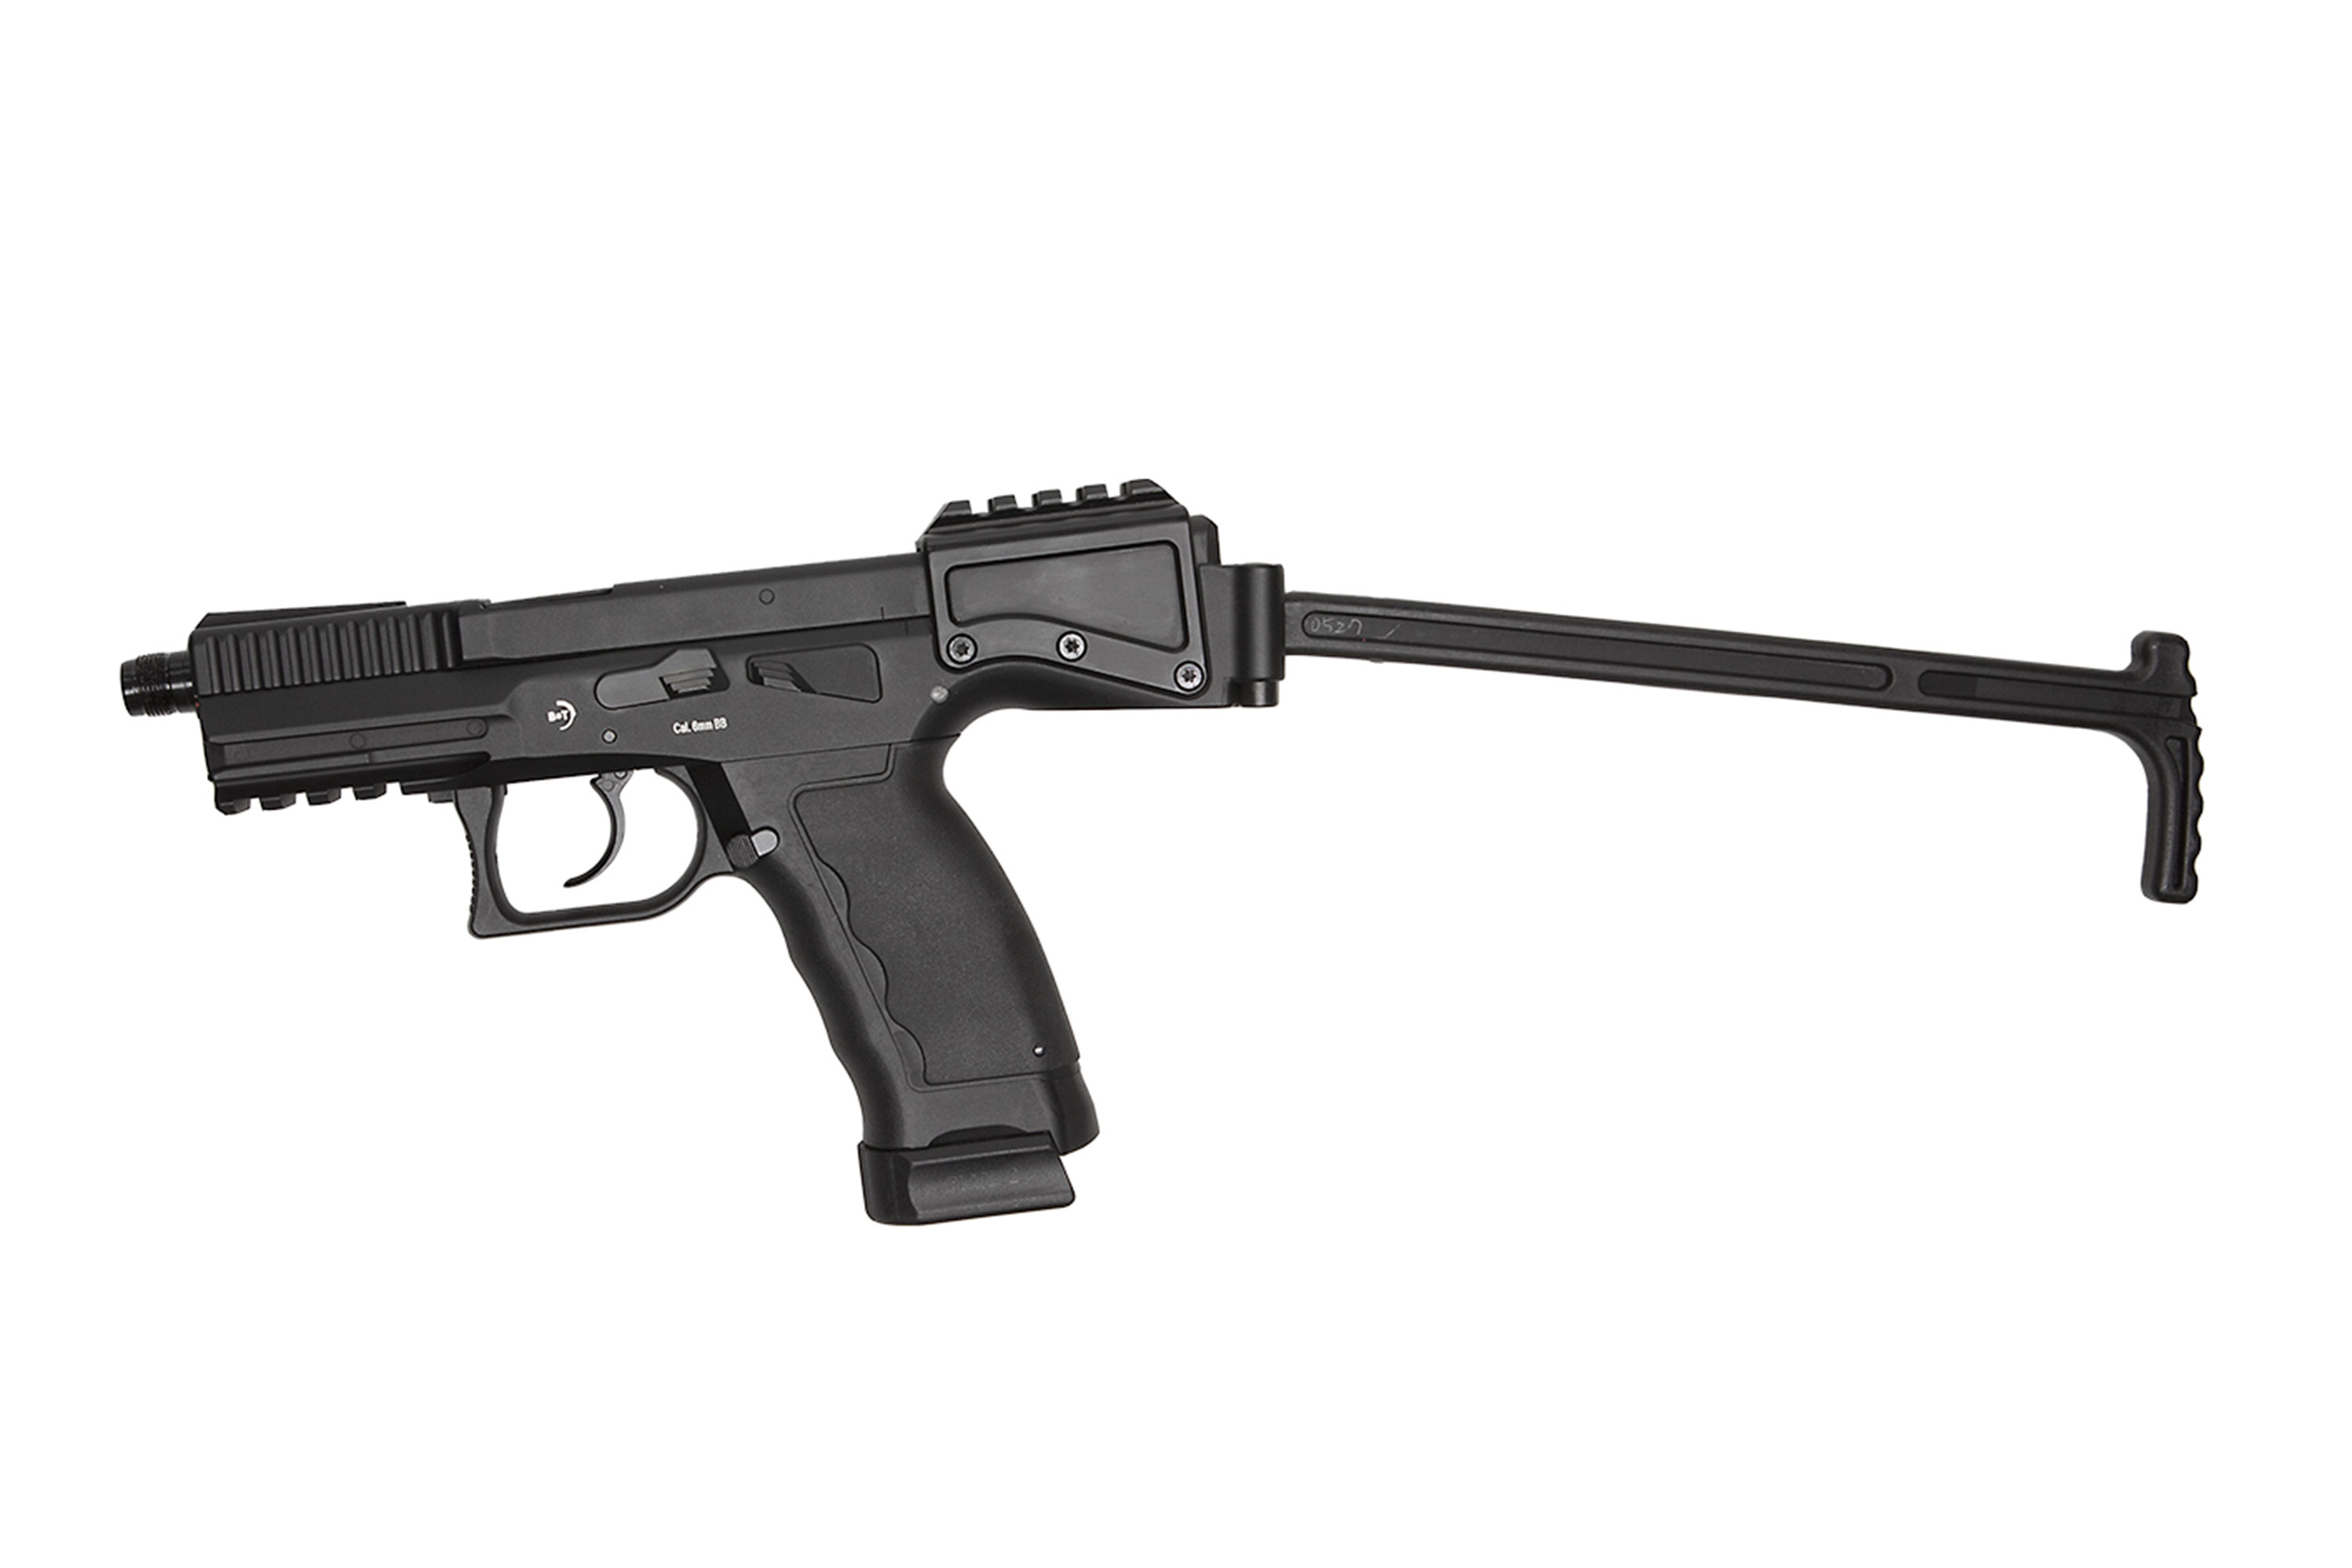 B&T USW A1 schwarz 6mm - Airsoft Co2 BlowBack